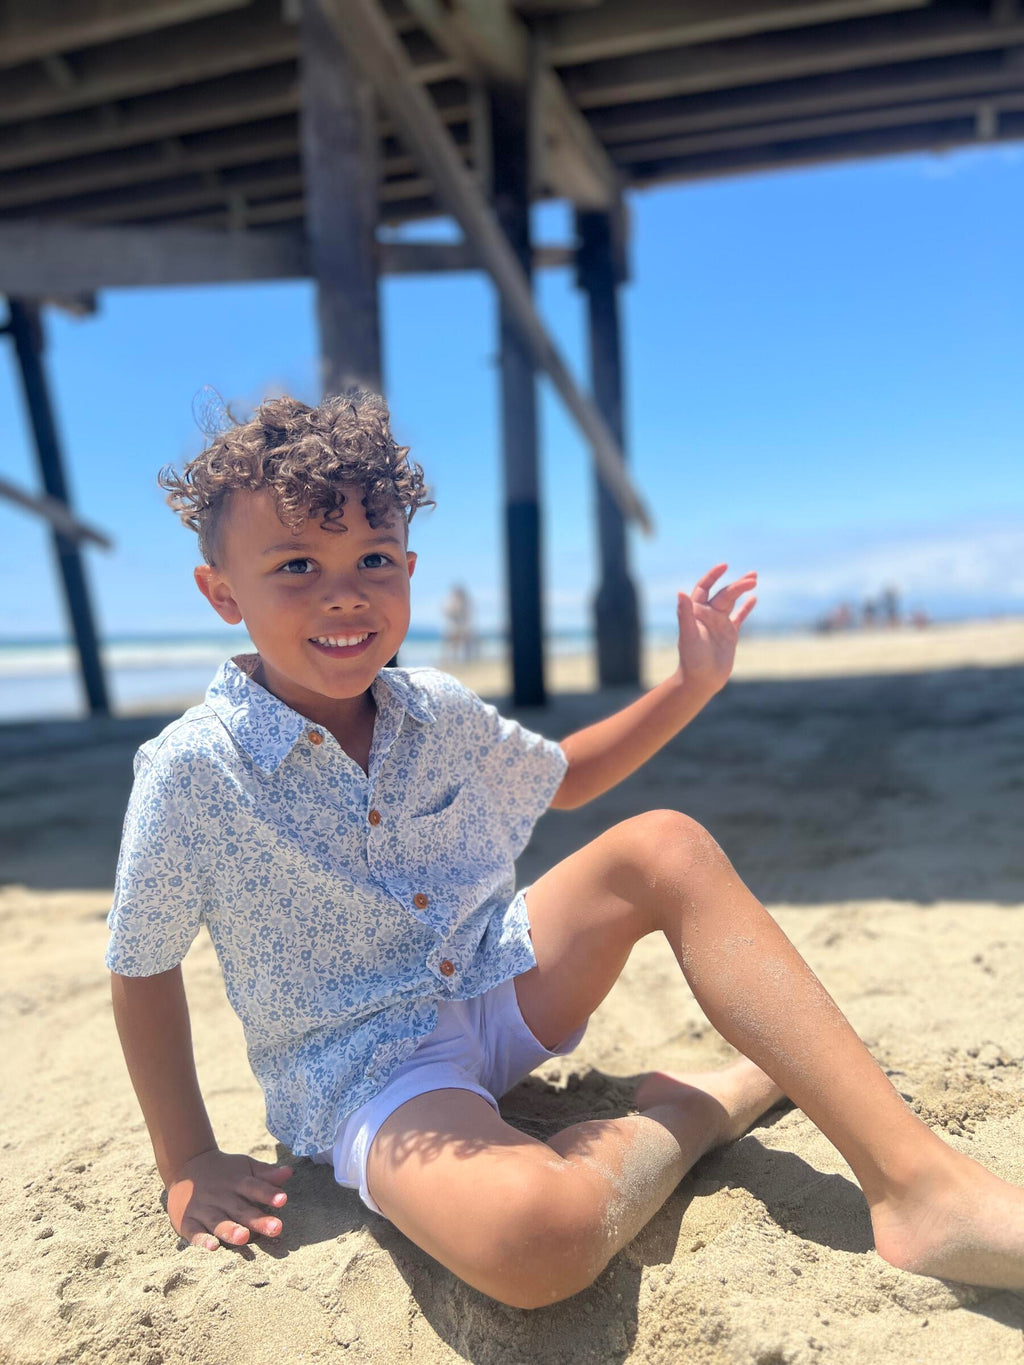 A boy with brown curly hair wearing the blue floral woven shirt and white gauze shorts, sitting on the sand at the beach.